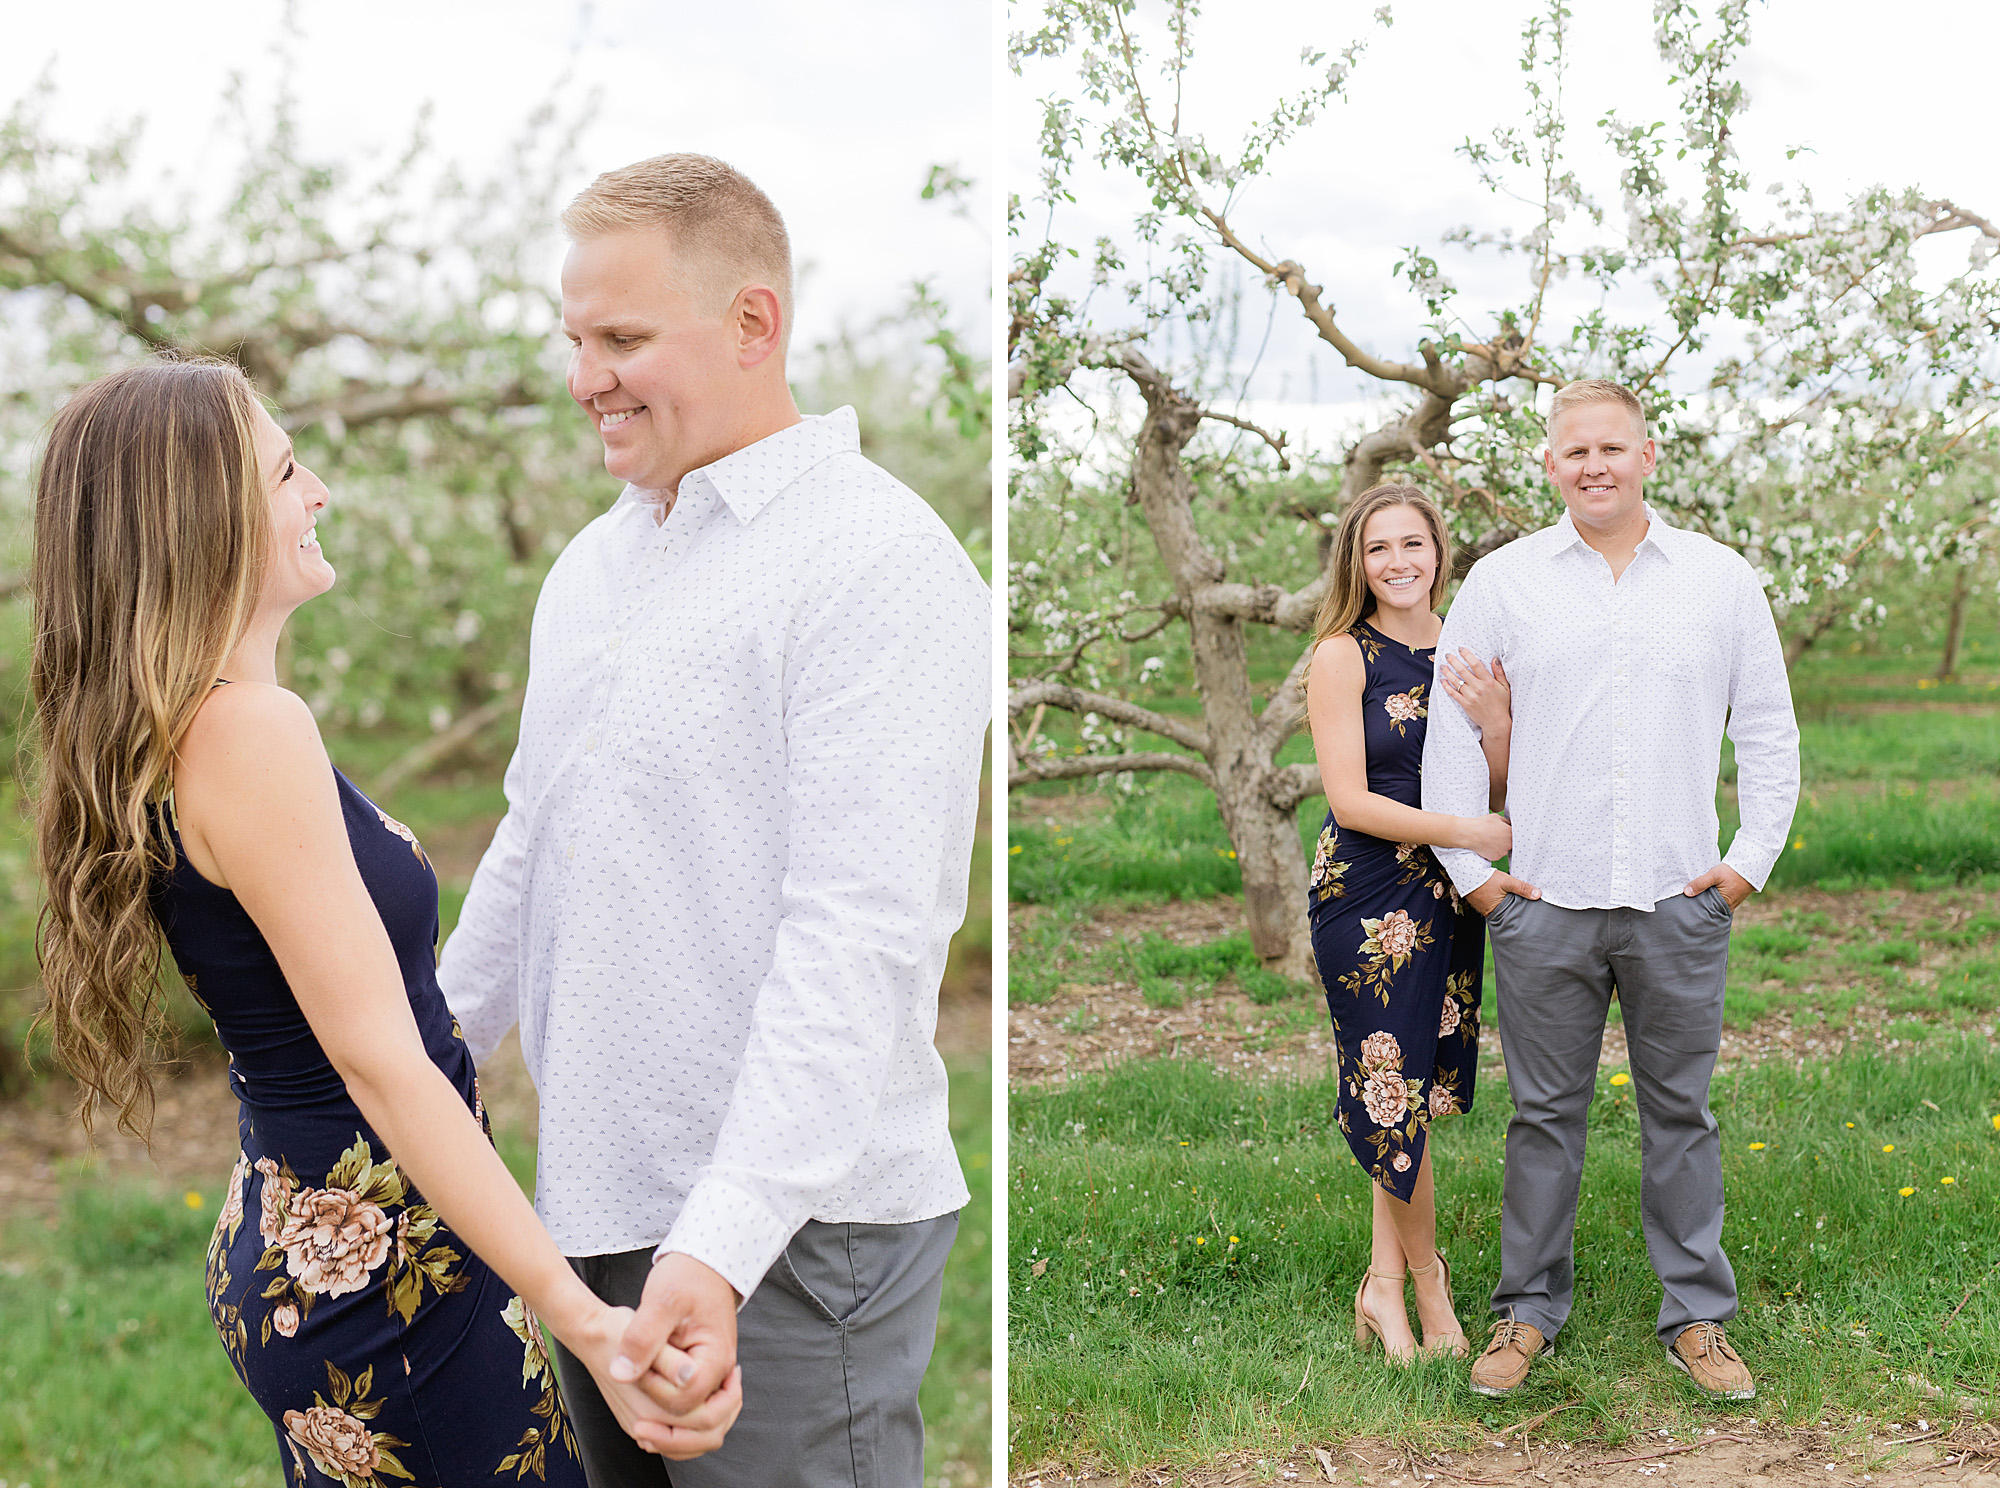 A classic Michigan Spring apple blossom engagement session at Blake’s Orchard by Breanne Rochelle Photography.